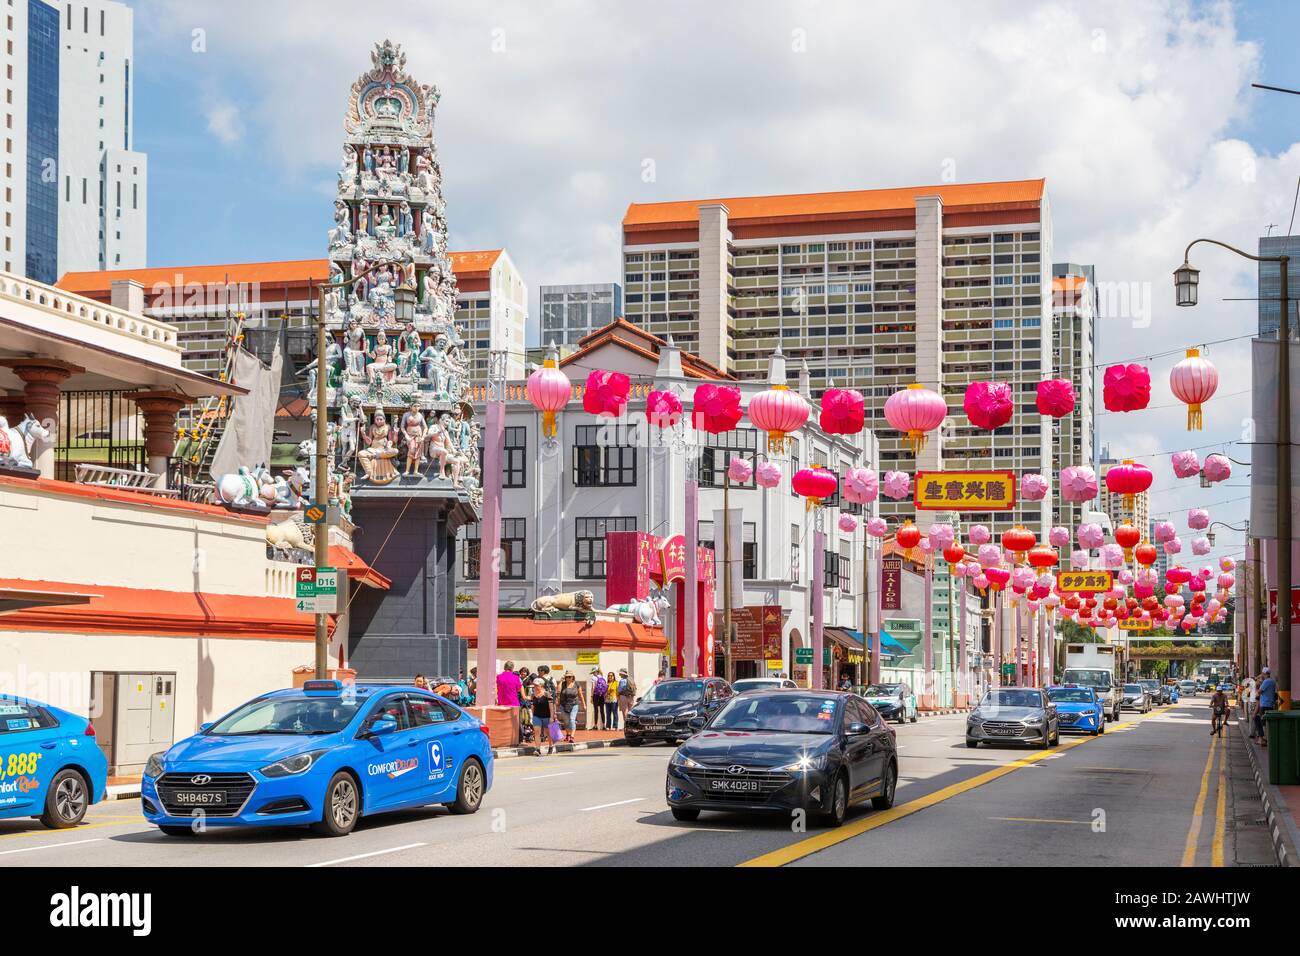 South Bridge Road, Chinatown, Singapore decorated with coloured lanterns to celebrate the Chinese New Year, Singapore, Asia Stock Photo